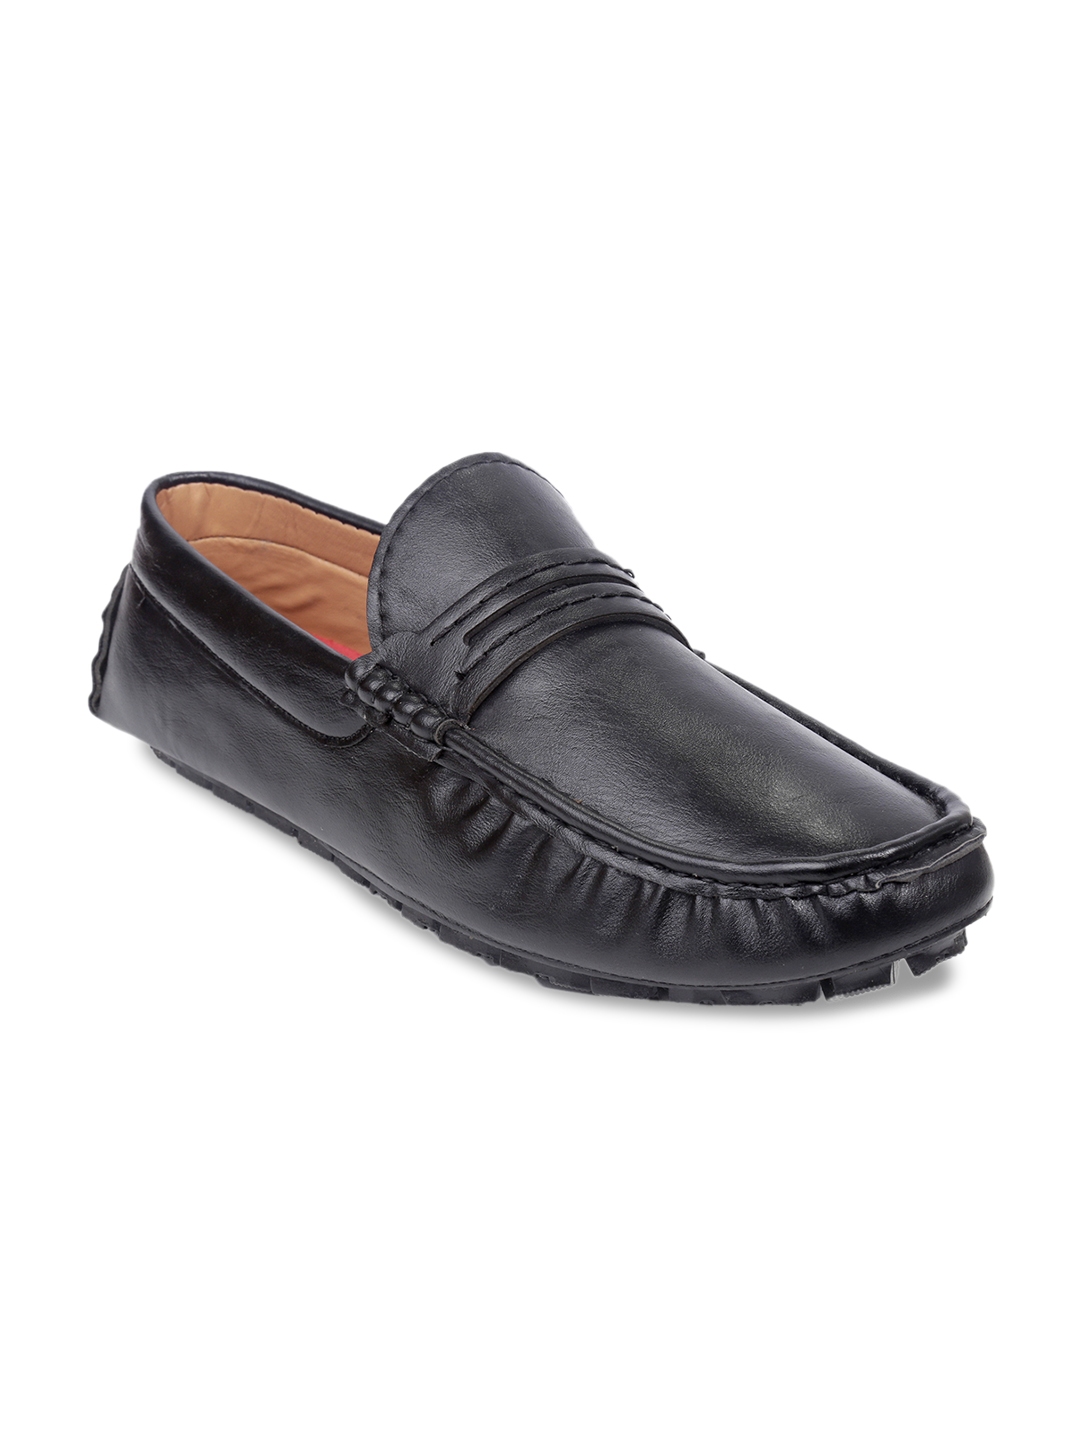 Buy Bacca Bucci Men Black Loafers - Casual Shoes for Men 8176091 | Myntra